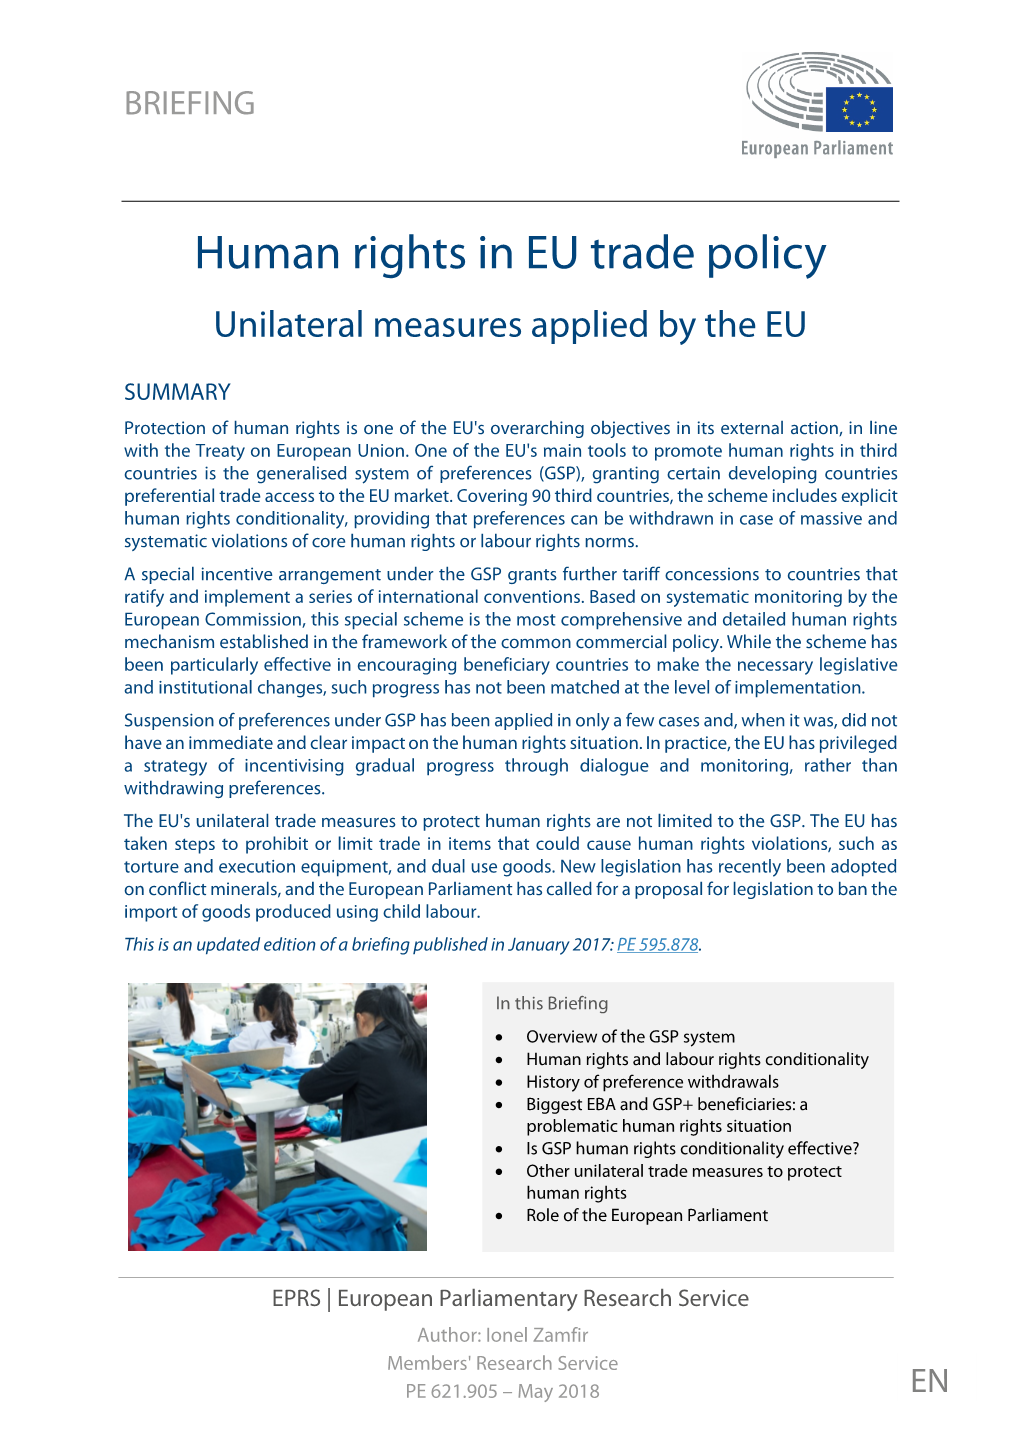 Human Rights in EU Trade Policy Unilateral Measures Applied by the EU